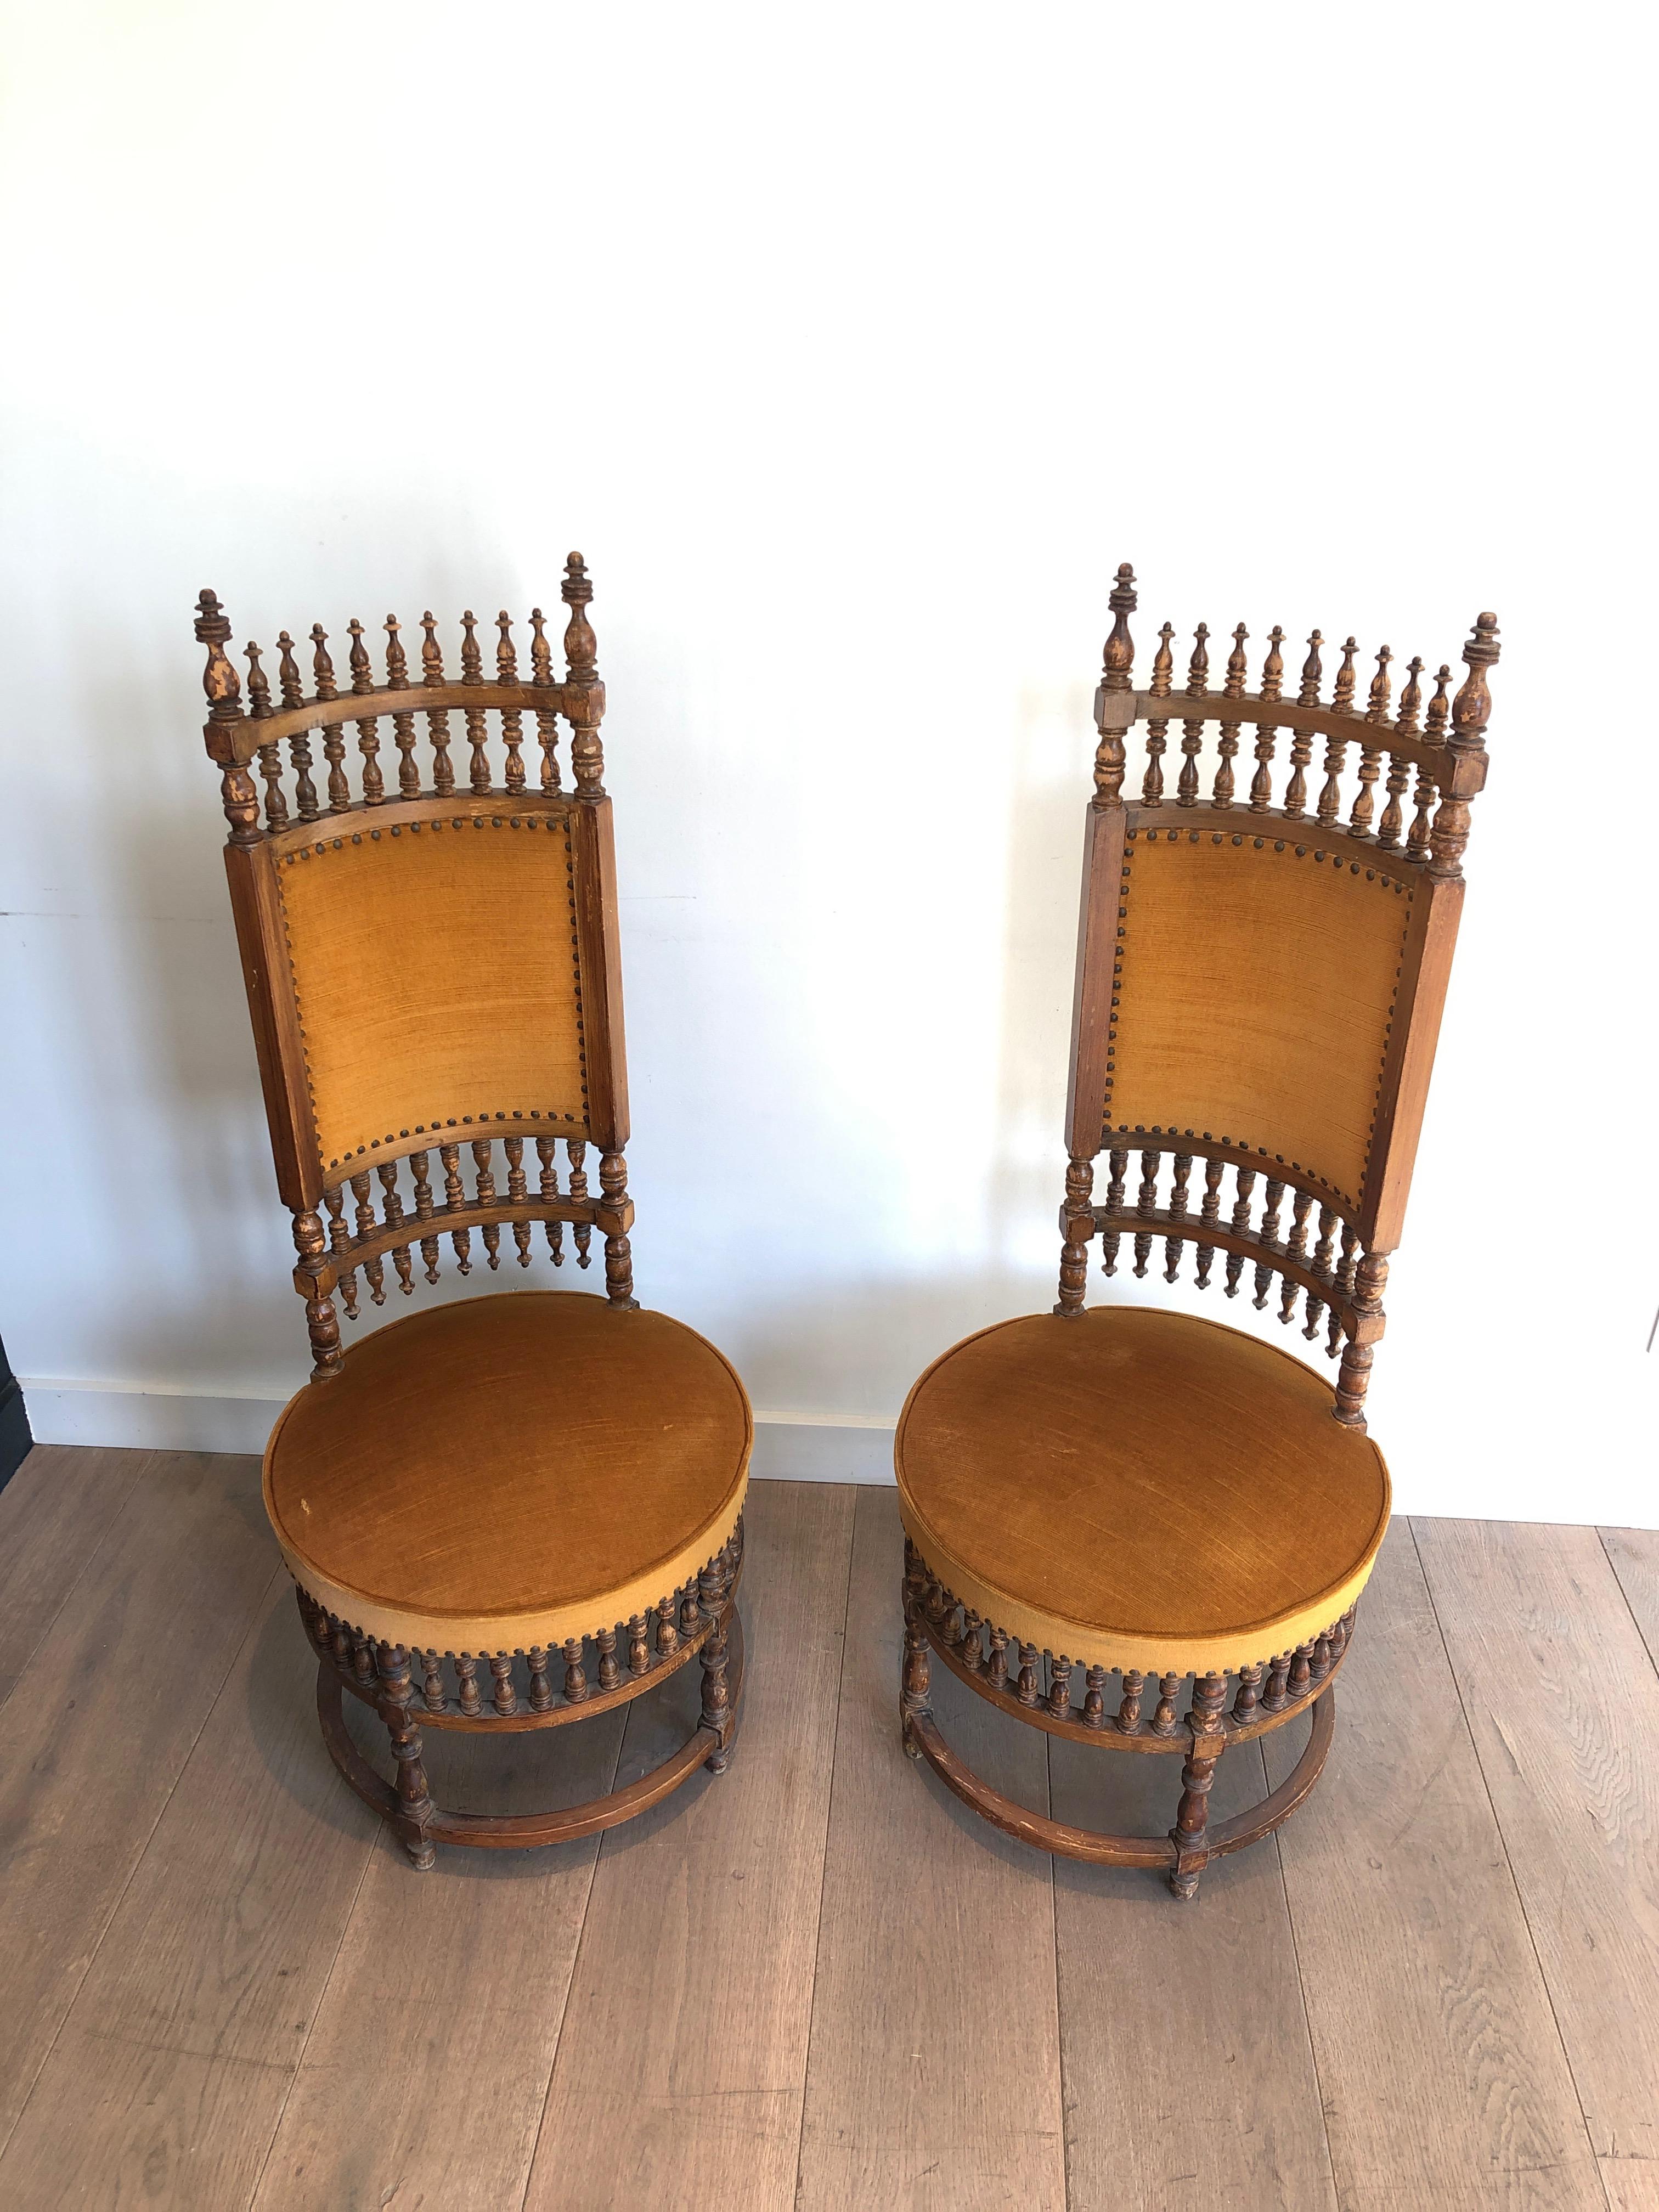 This pair of very unusual chairs is made of wood and fabric. This is an interesting Arts & Crafts work. Circa 1900